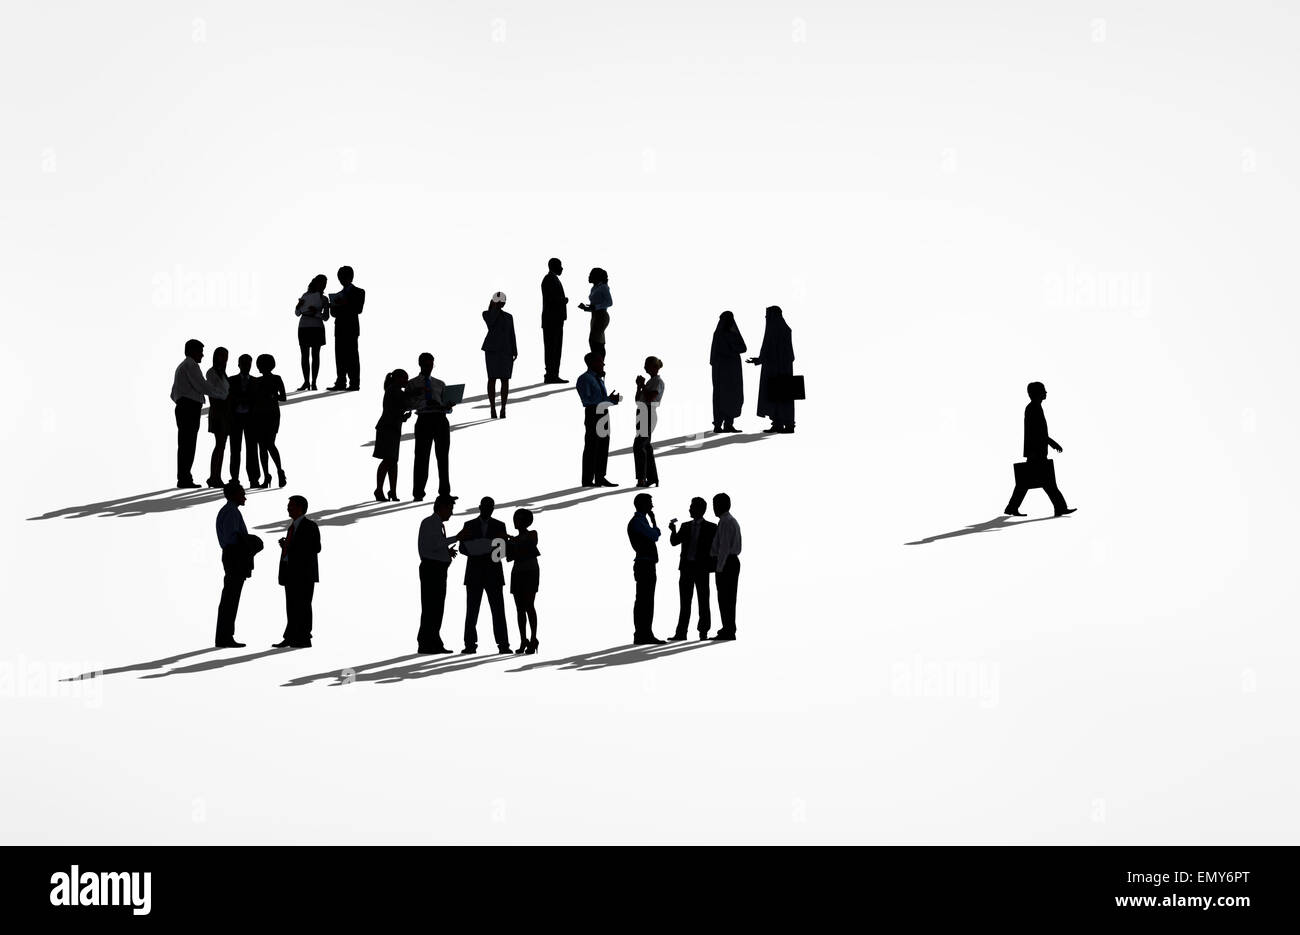 Lone Silhouettes Of A Business Man Walking Away From The Group Of Silhouettes Of Business People. Stock Photo